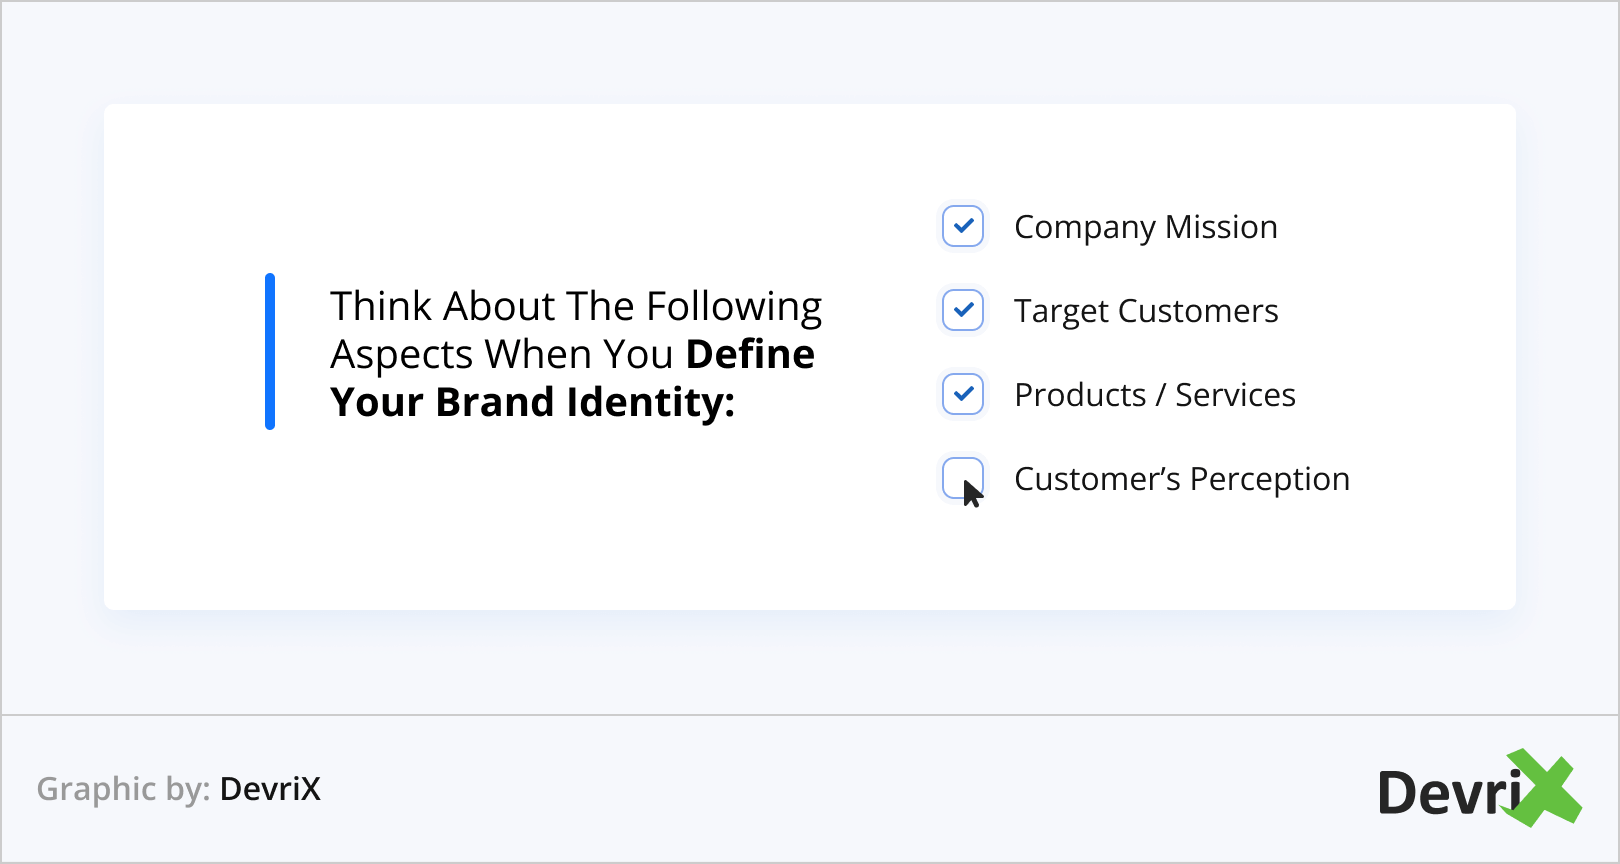 Defining Your Brand Identity